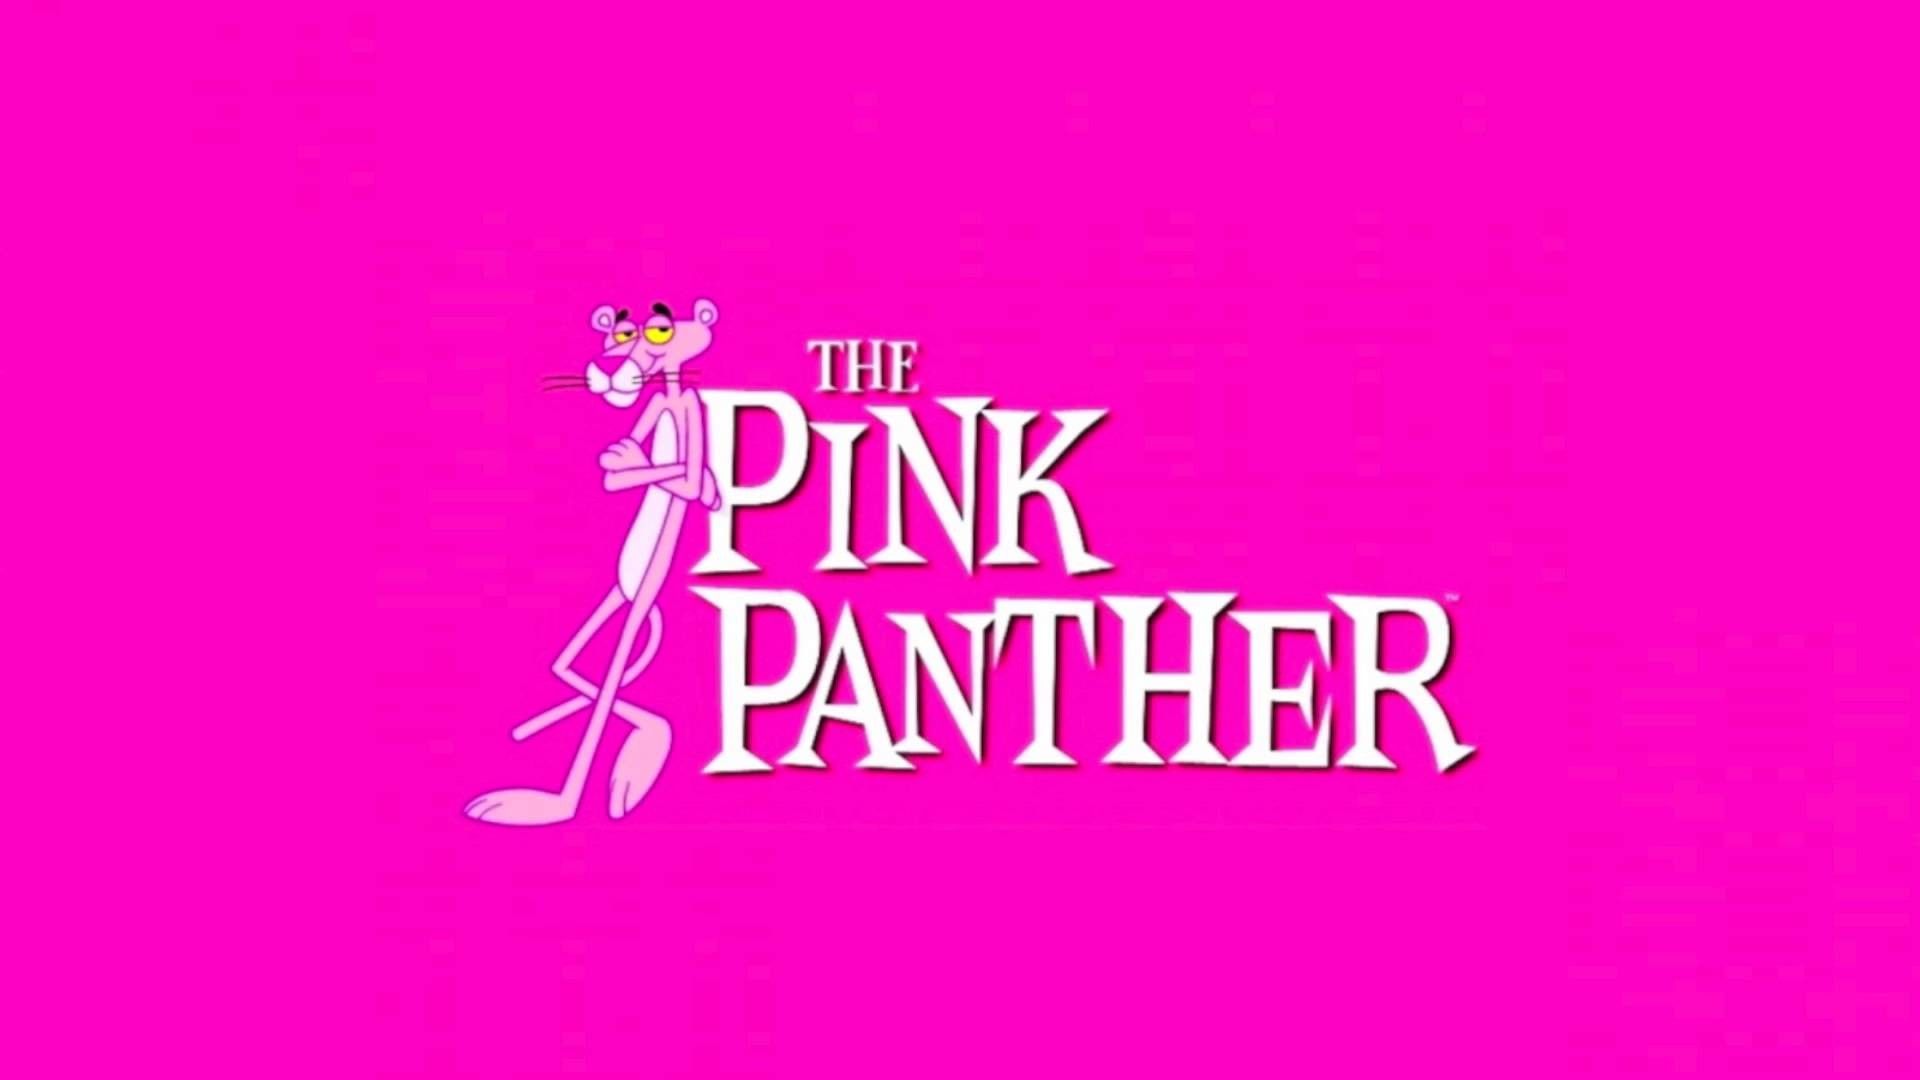 The Pink Panther Show - The Pink Panther in the classic pose, standing on her tiptoes with her head tilted back and a look of amusement on her face. - Pink Panther